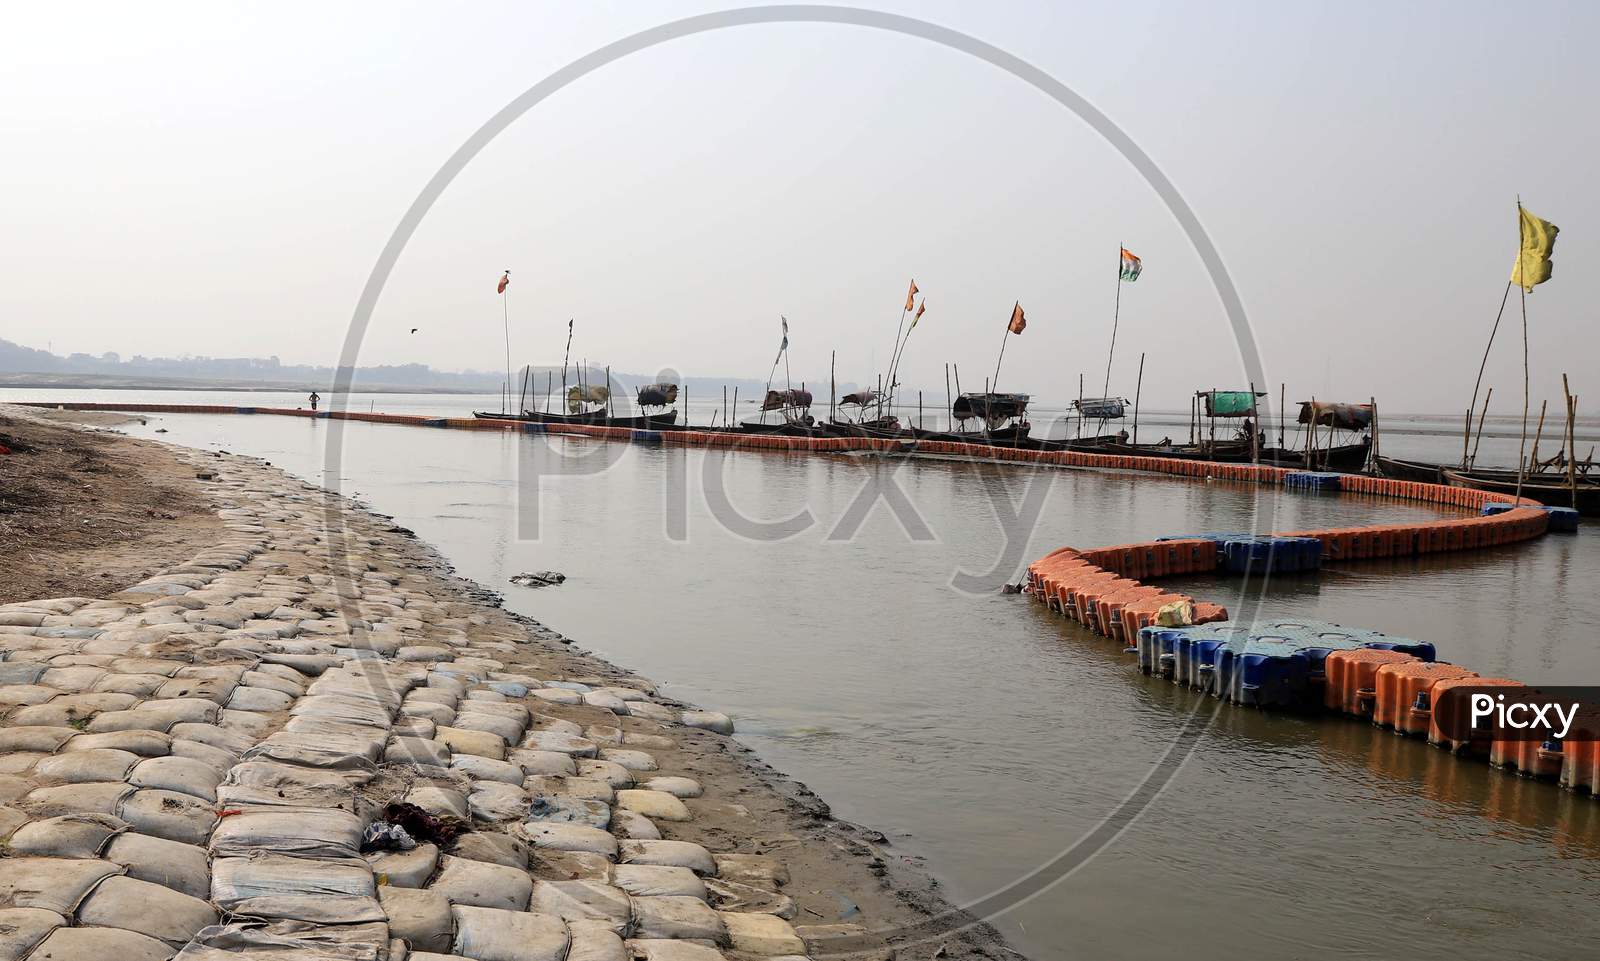 A View Of Empty Sangam Aera During A Nationwide Lockdown To Slow The Spreading Of The Corona virus Disease (Covid-19), In Prayagraj, April, 15, 2020.